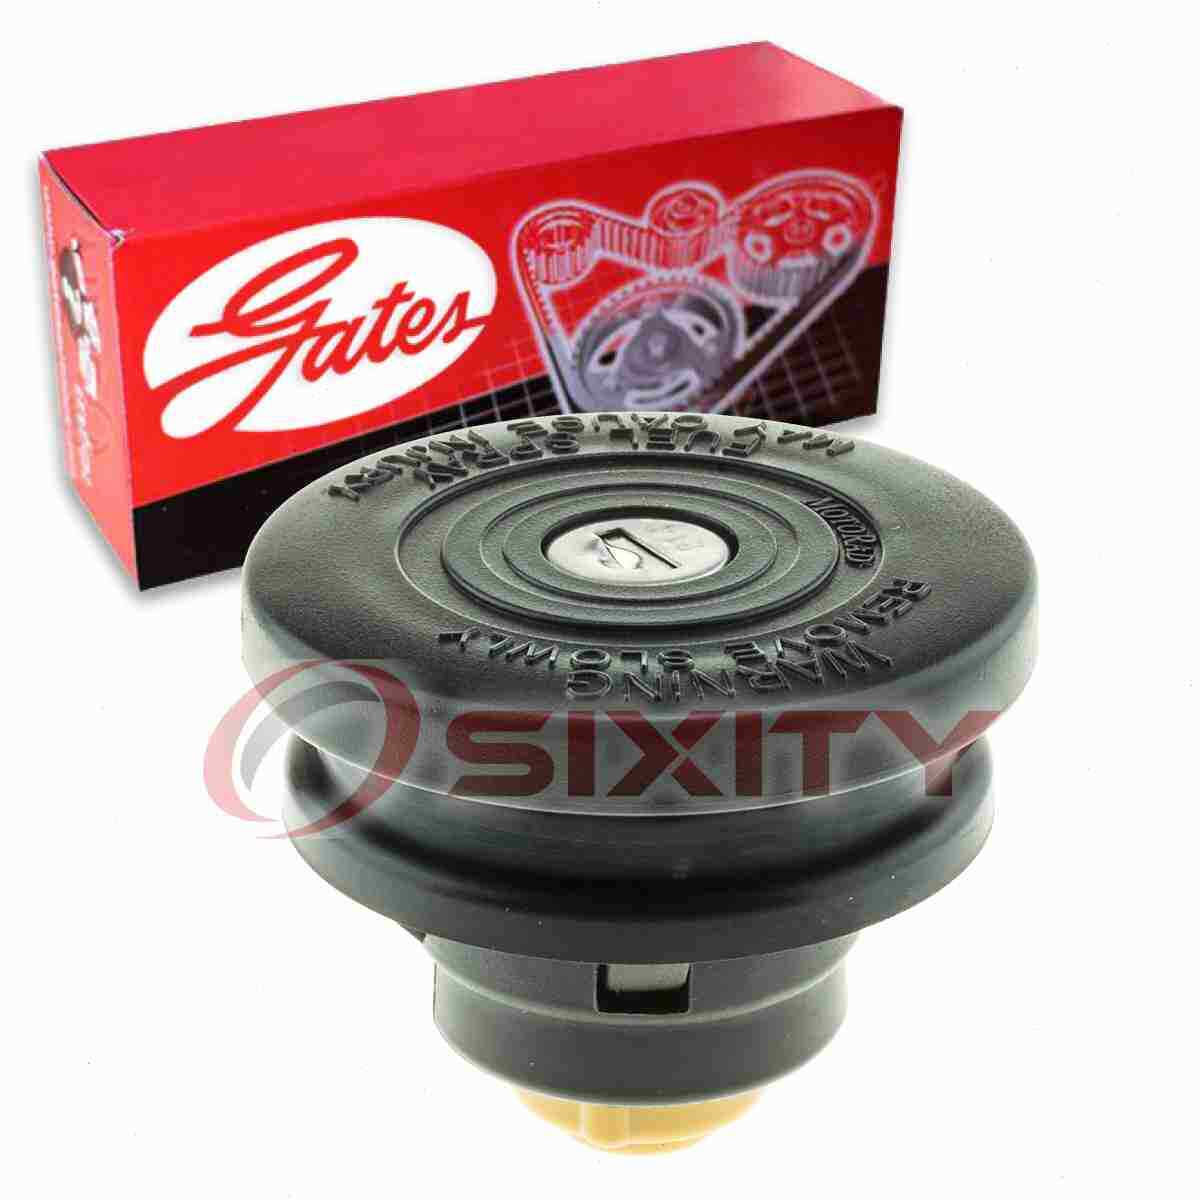 Gates Fuel Tank Cap for 1928 Studebaker President Six Gas Delivery Storage wq